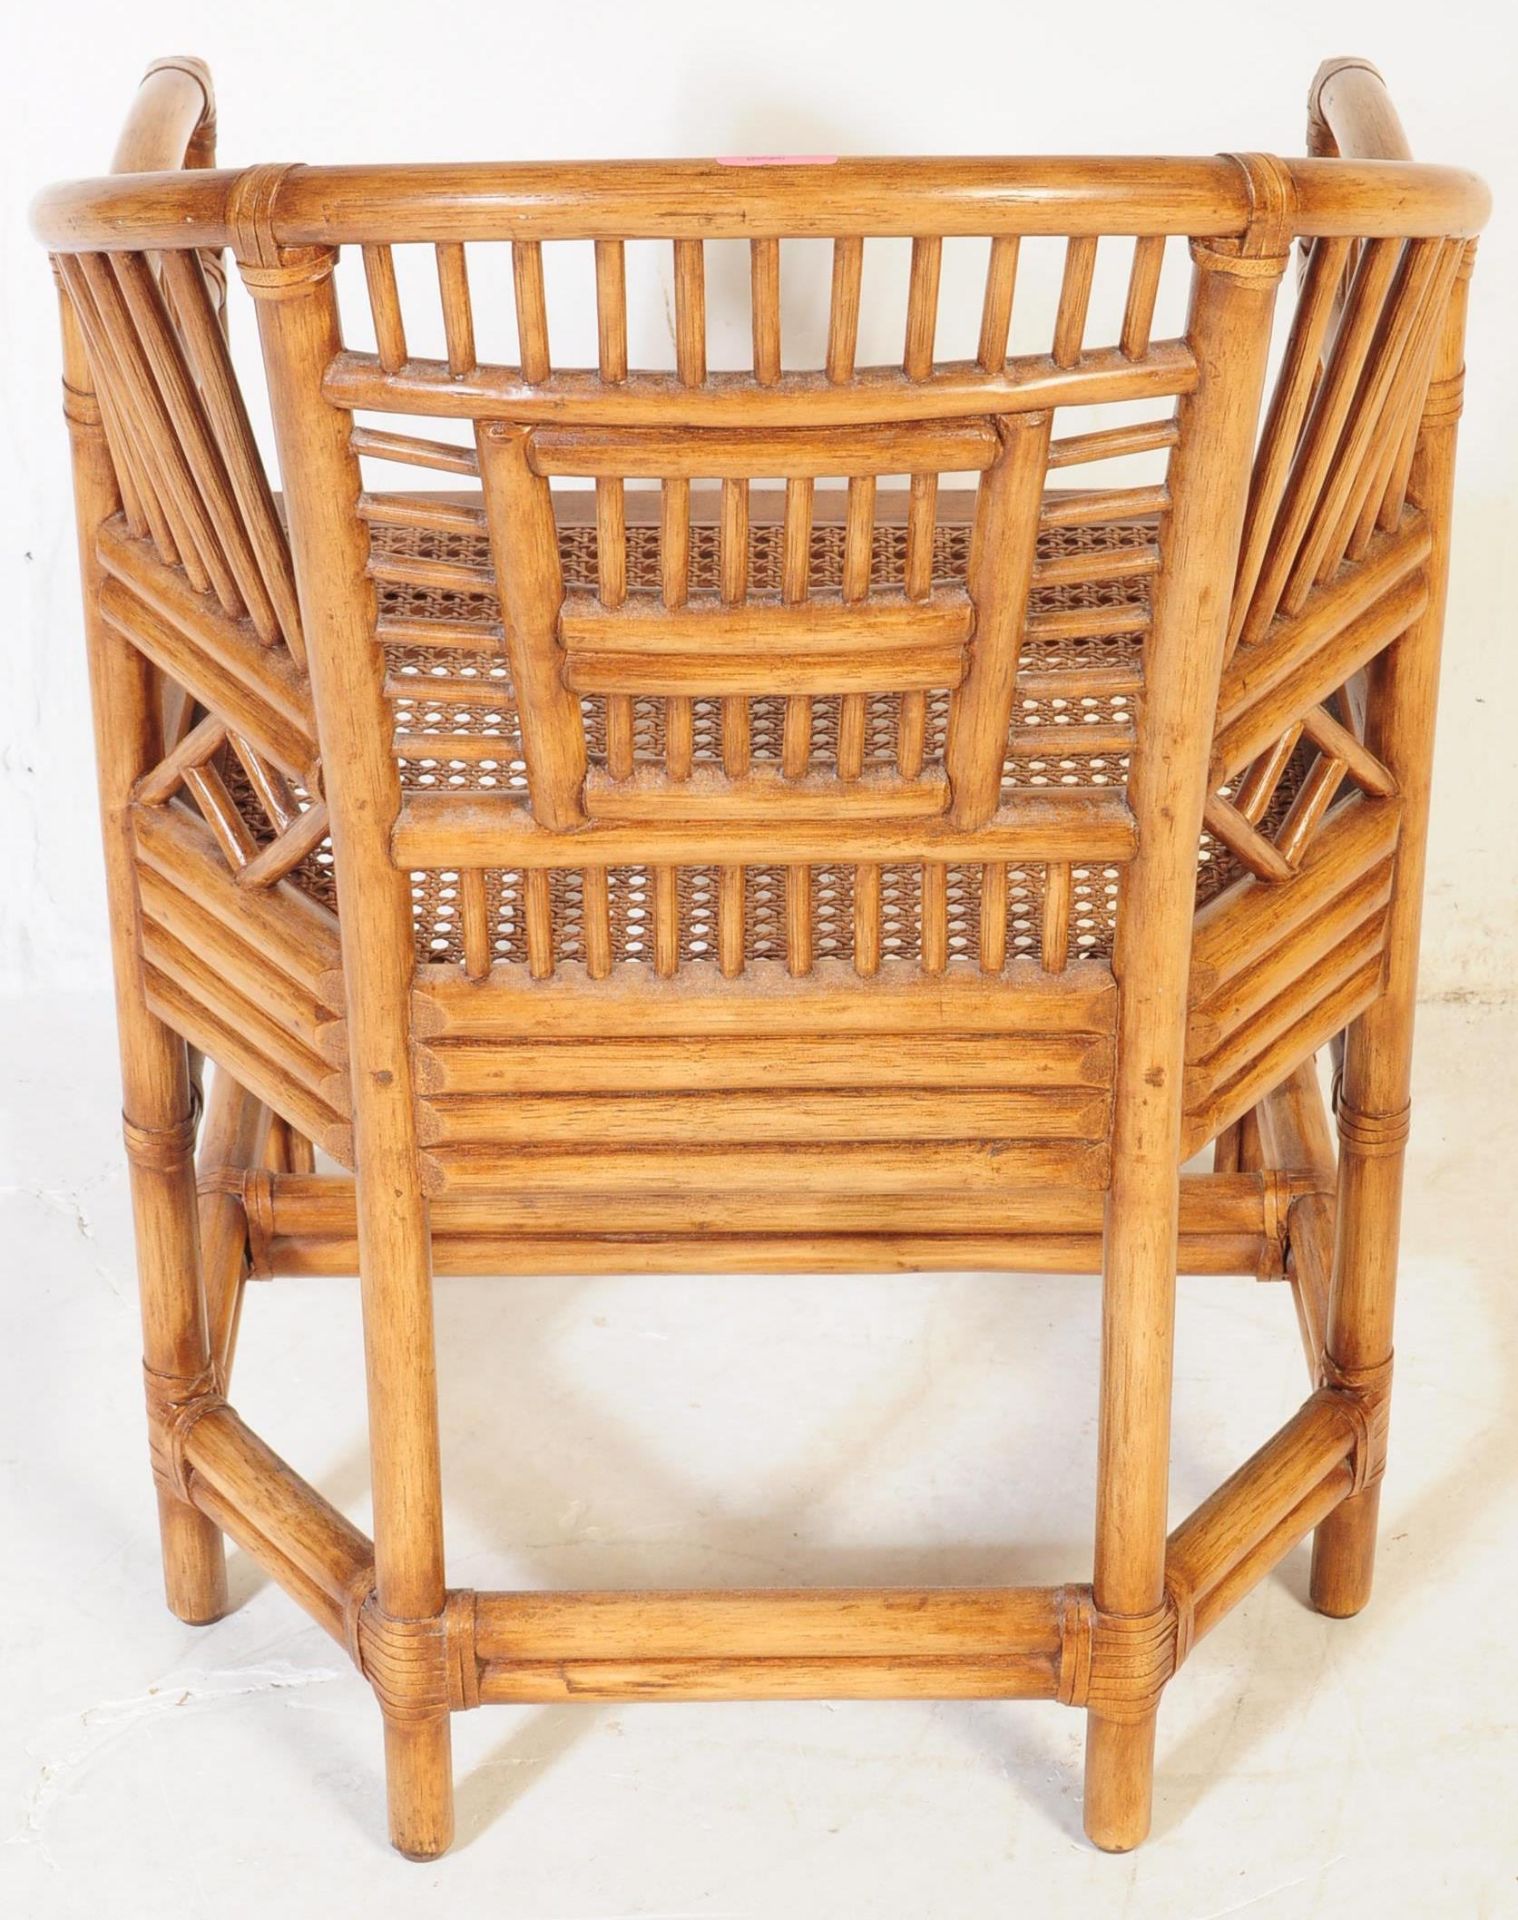 MID CENTURY 1960S BAMBOO ITALIAN STYLE CONSERVATORY CHAIR - Image 5 of 7